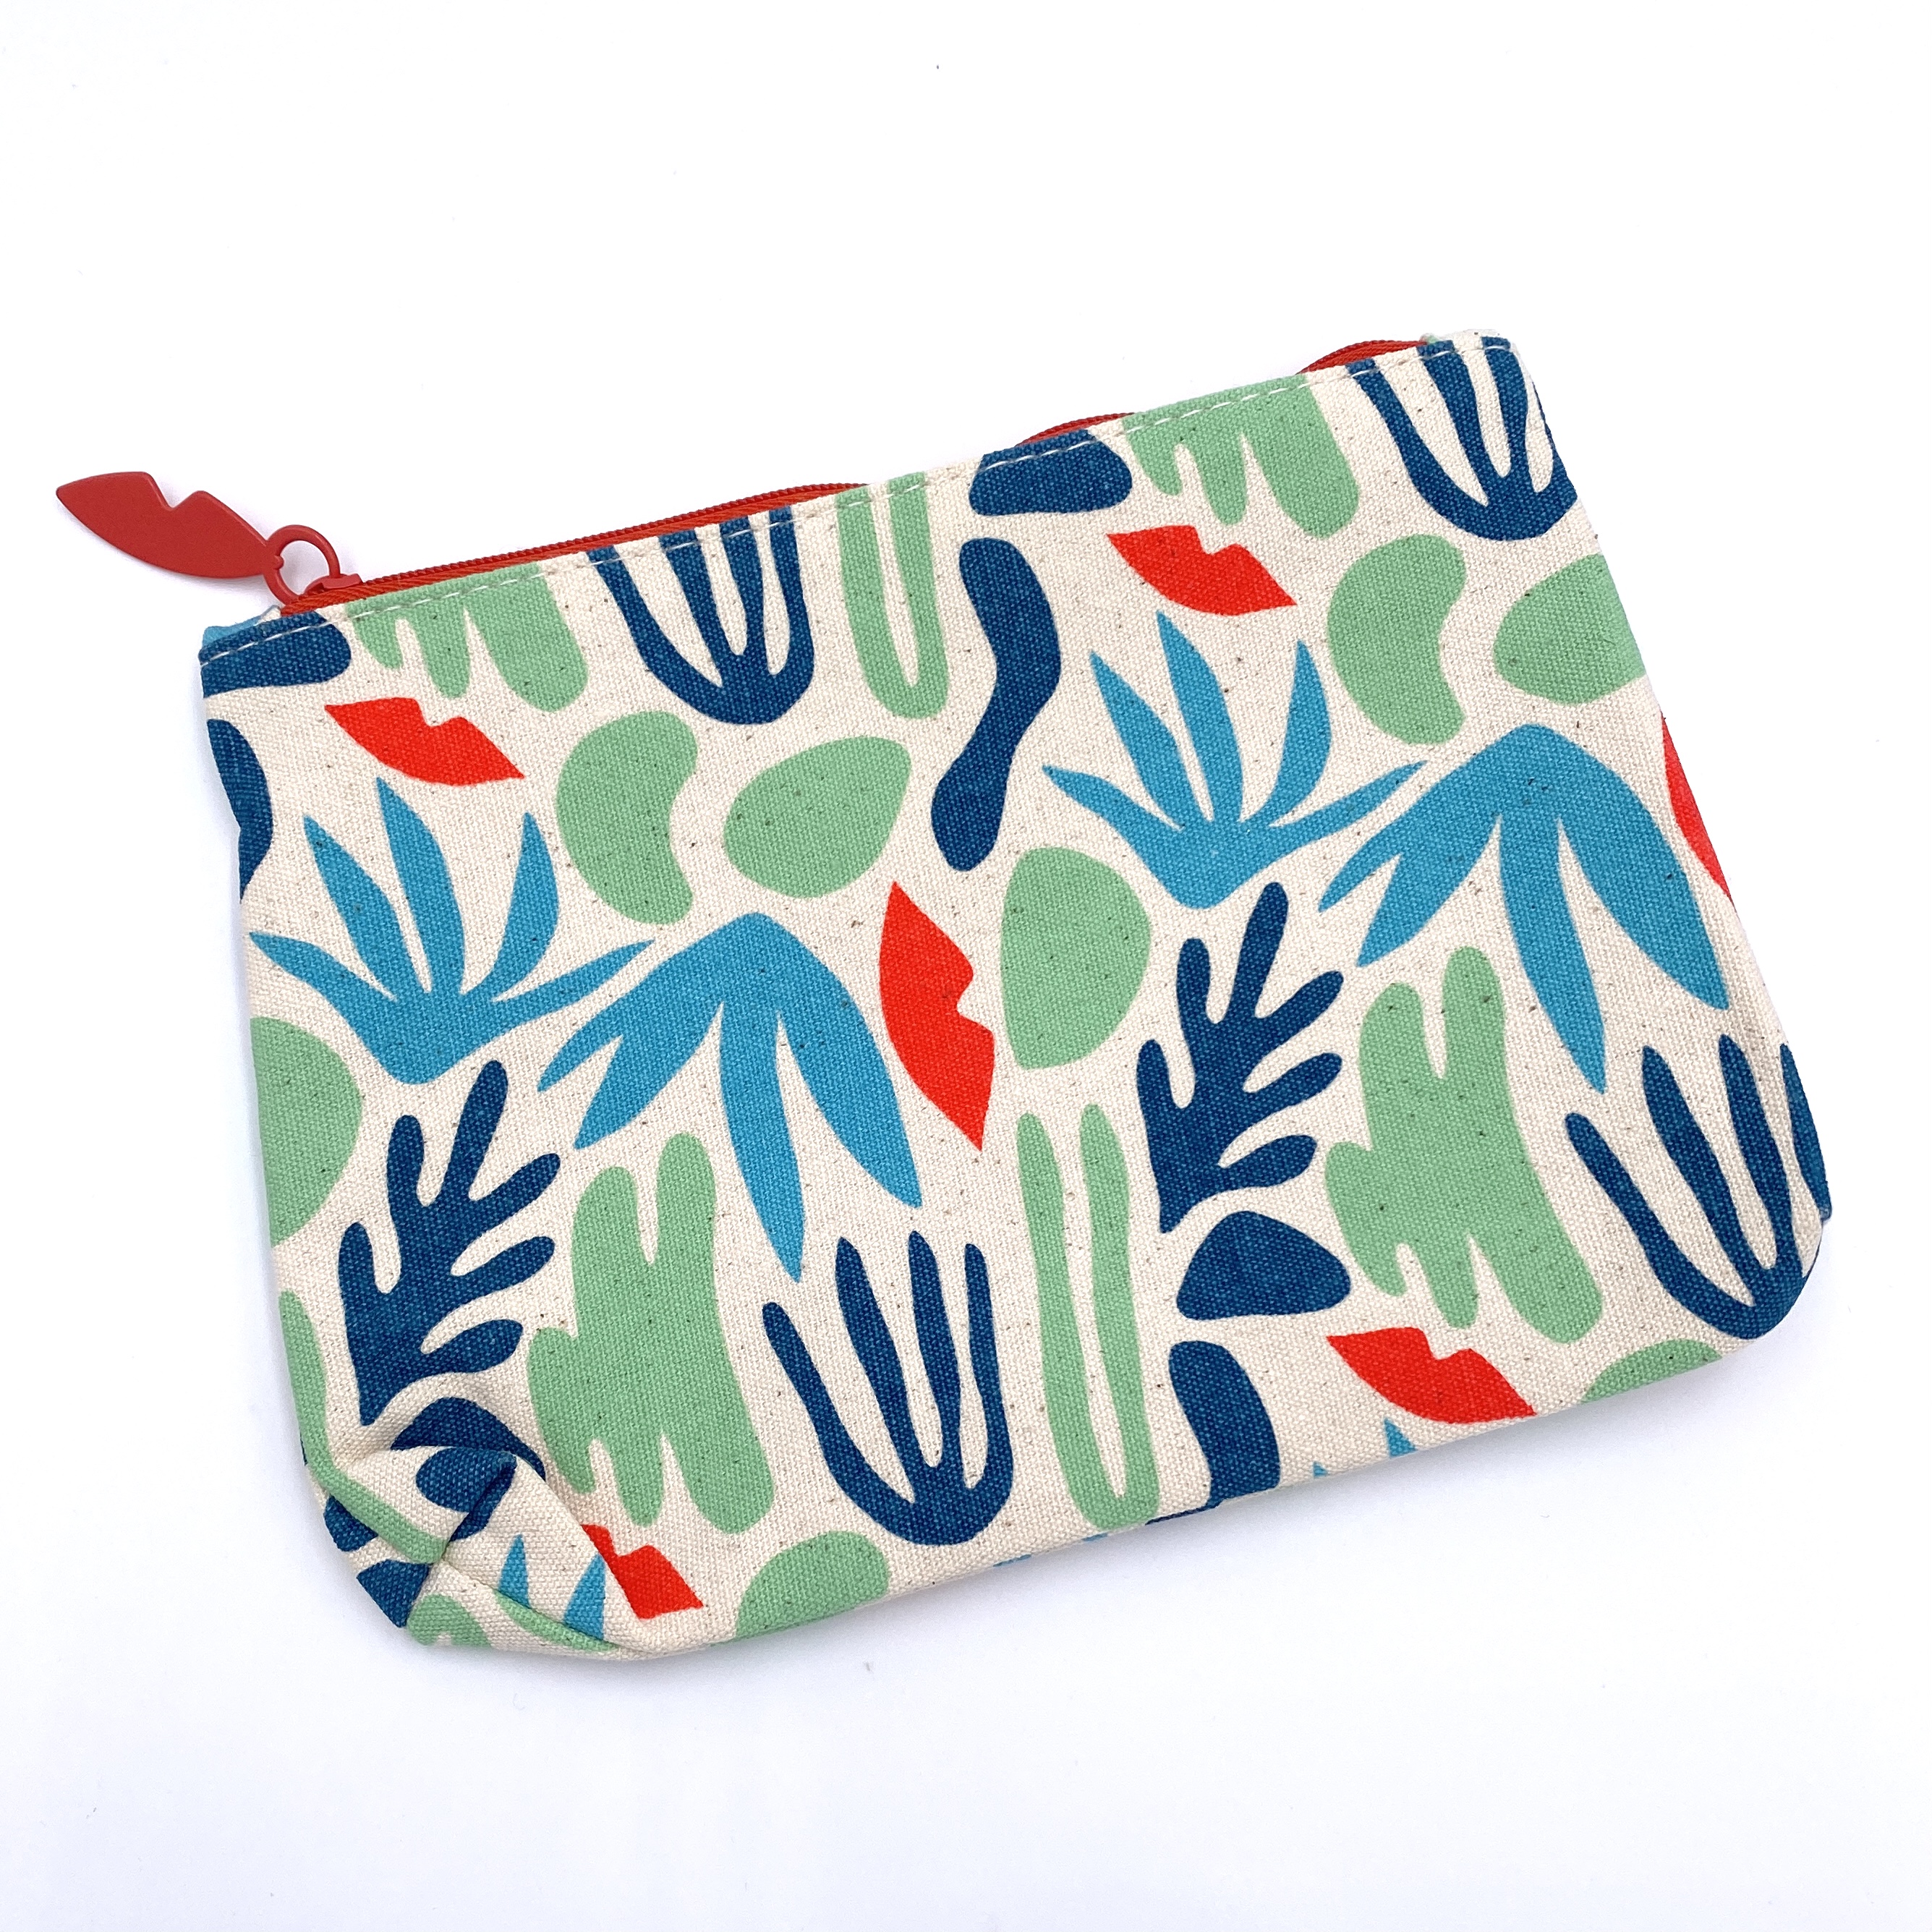 The Ipsy Glam Bag, showing the exterior pattern.